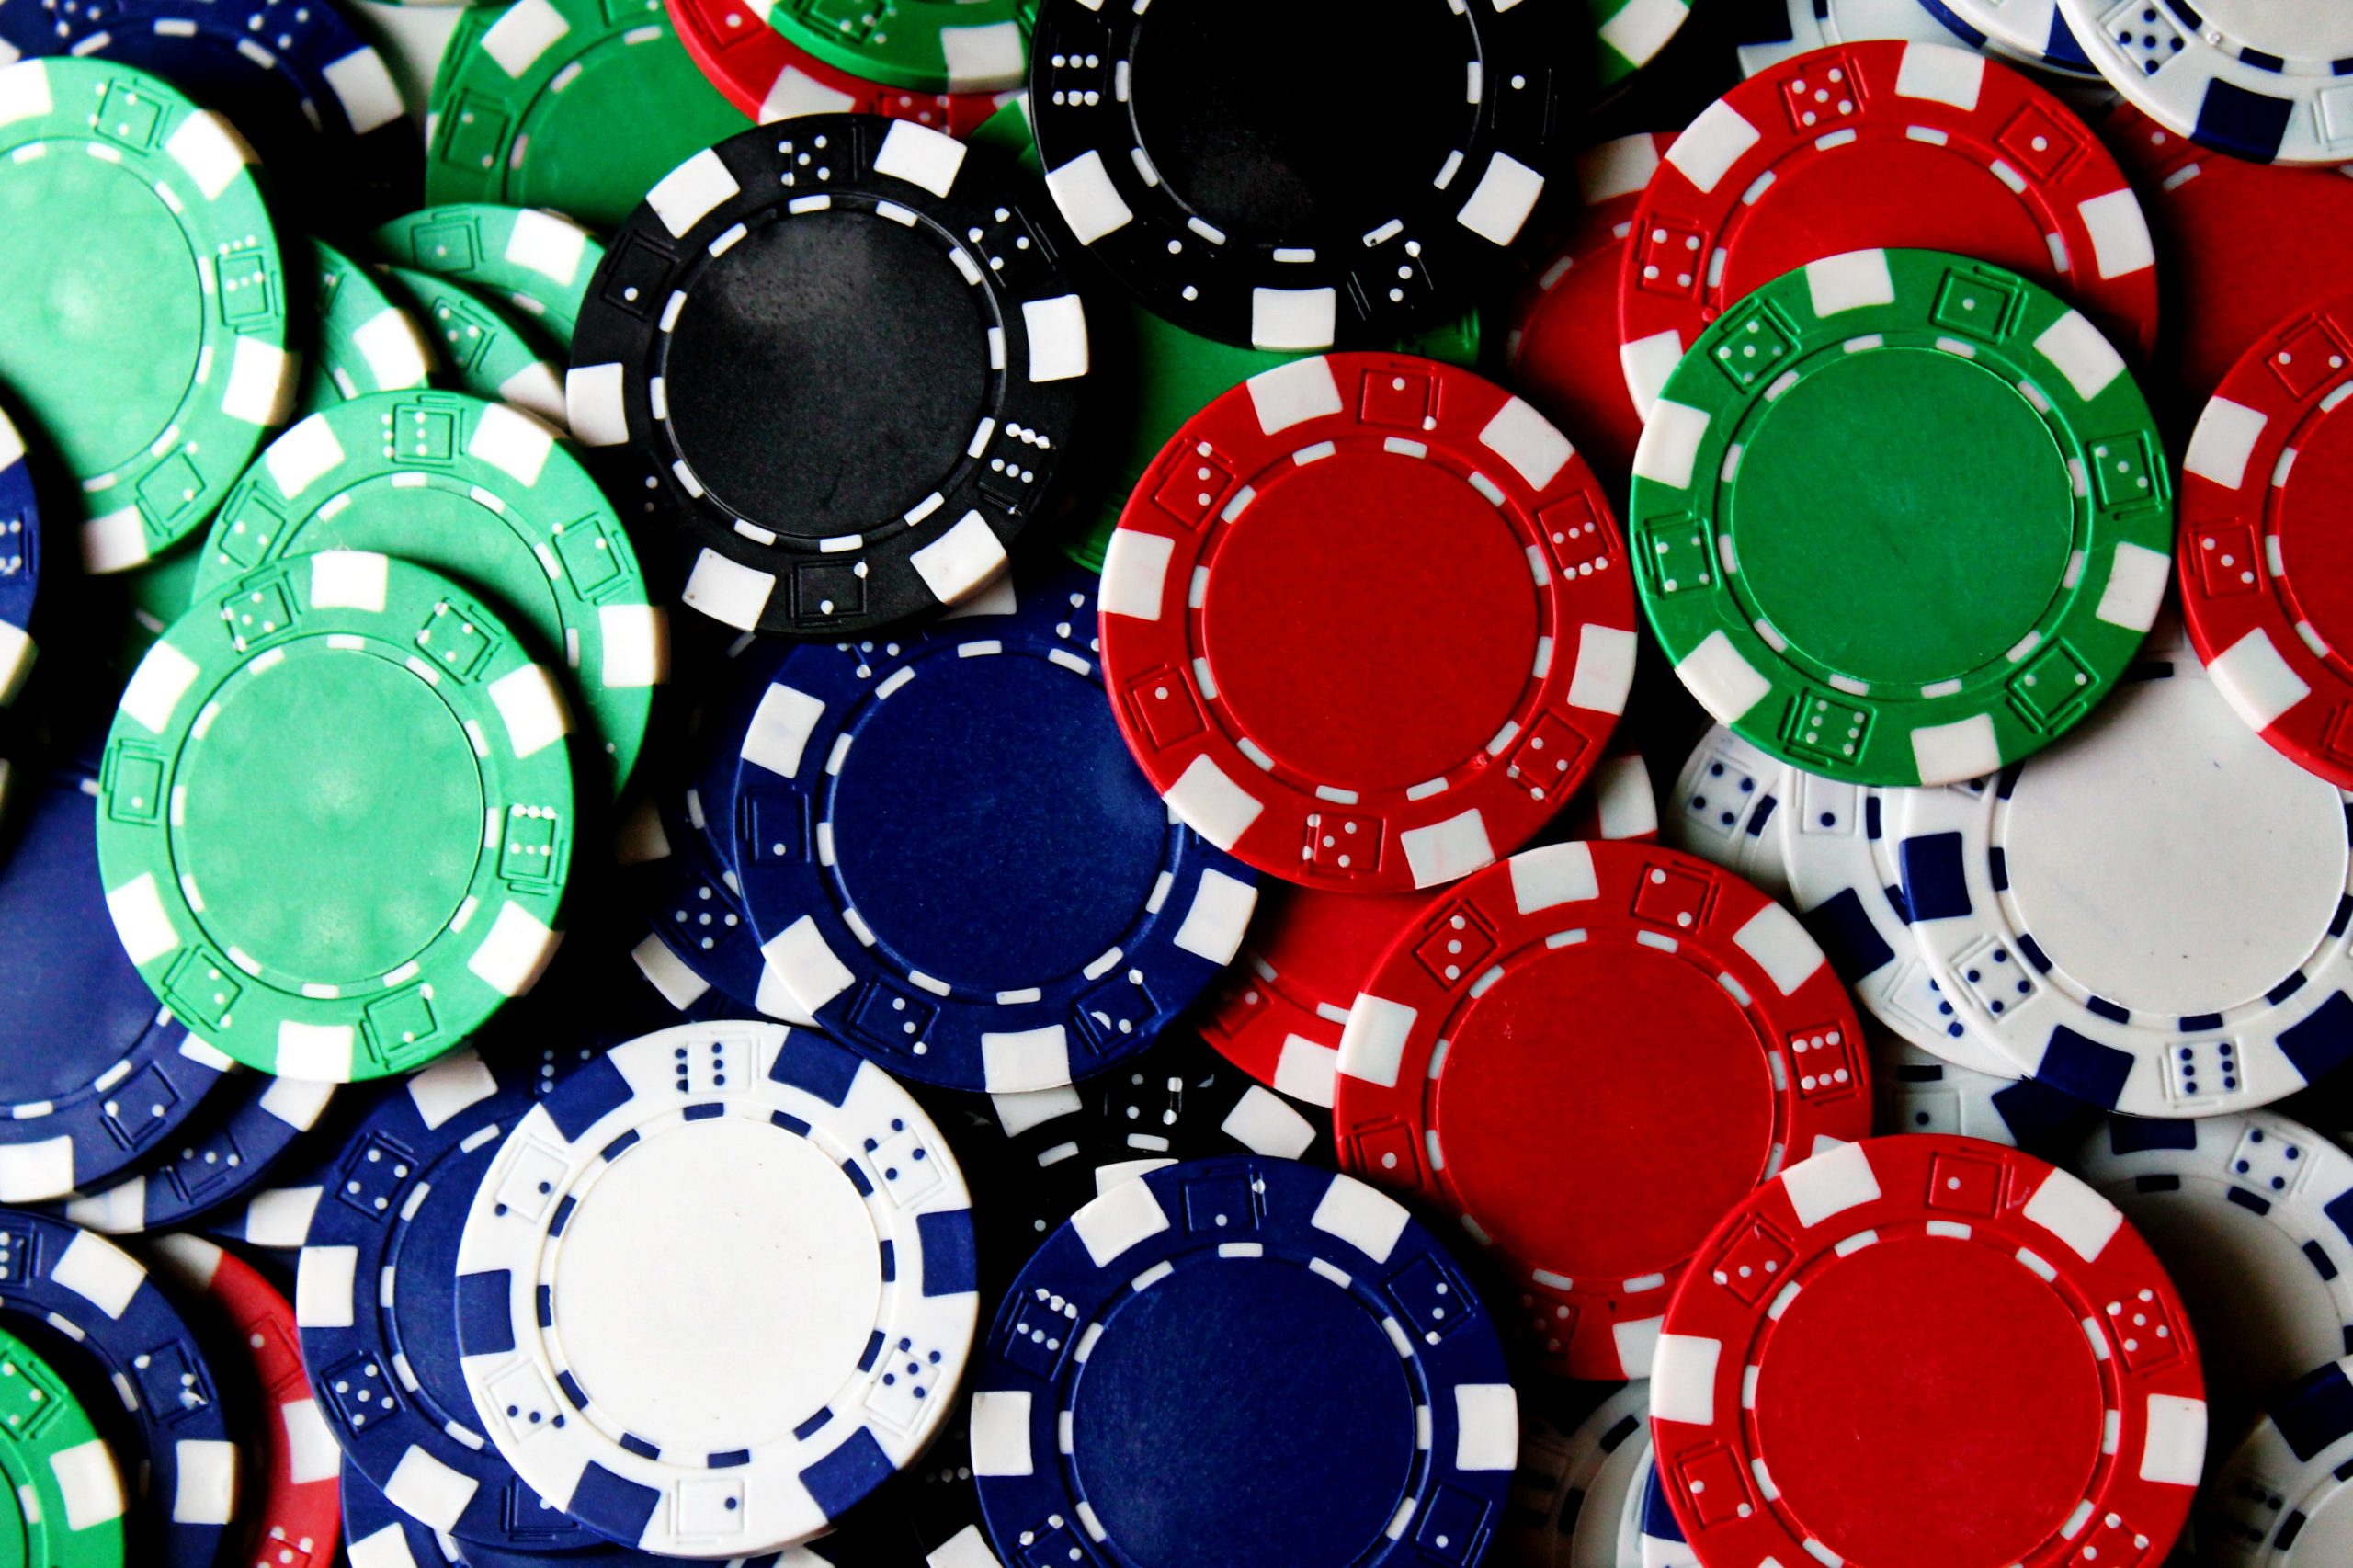 The difference between online poker and traditional table poker